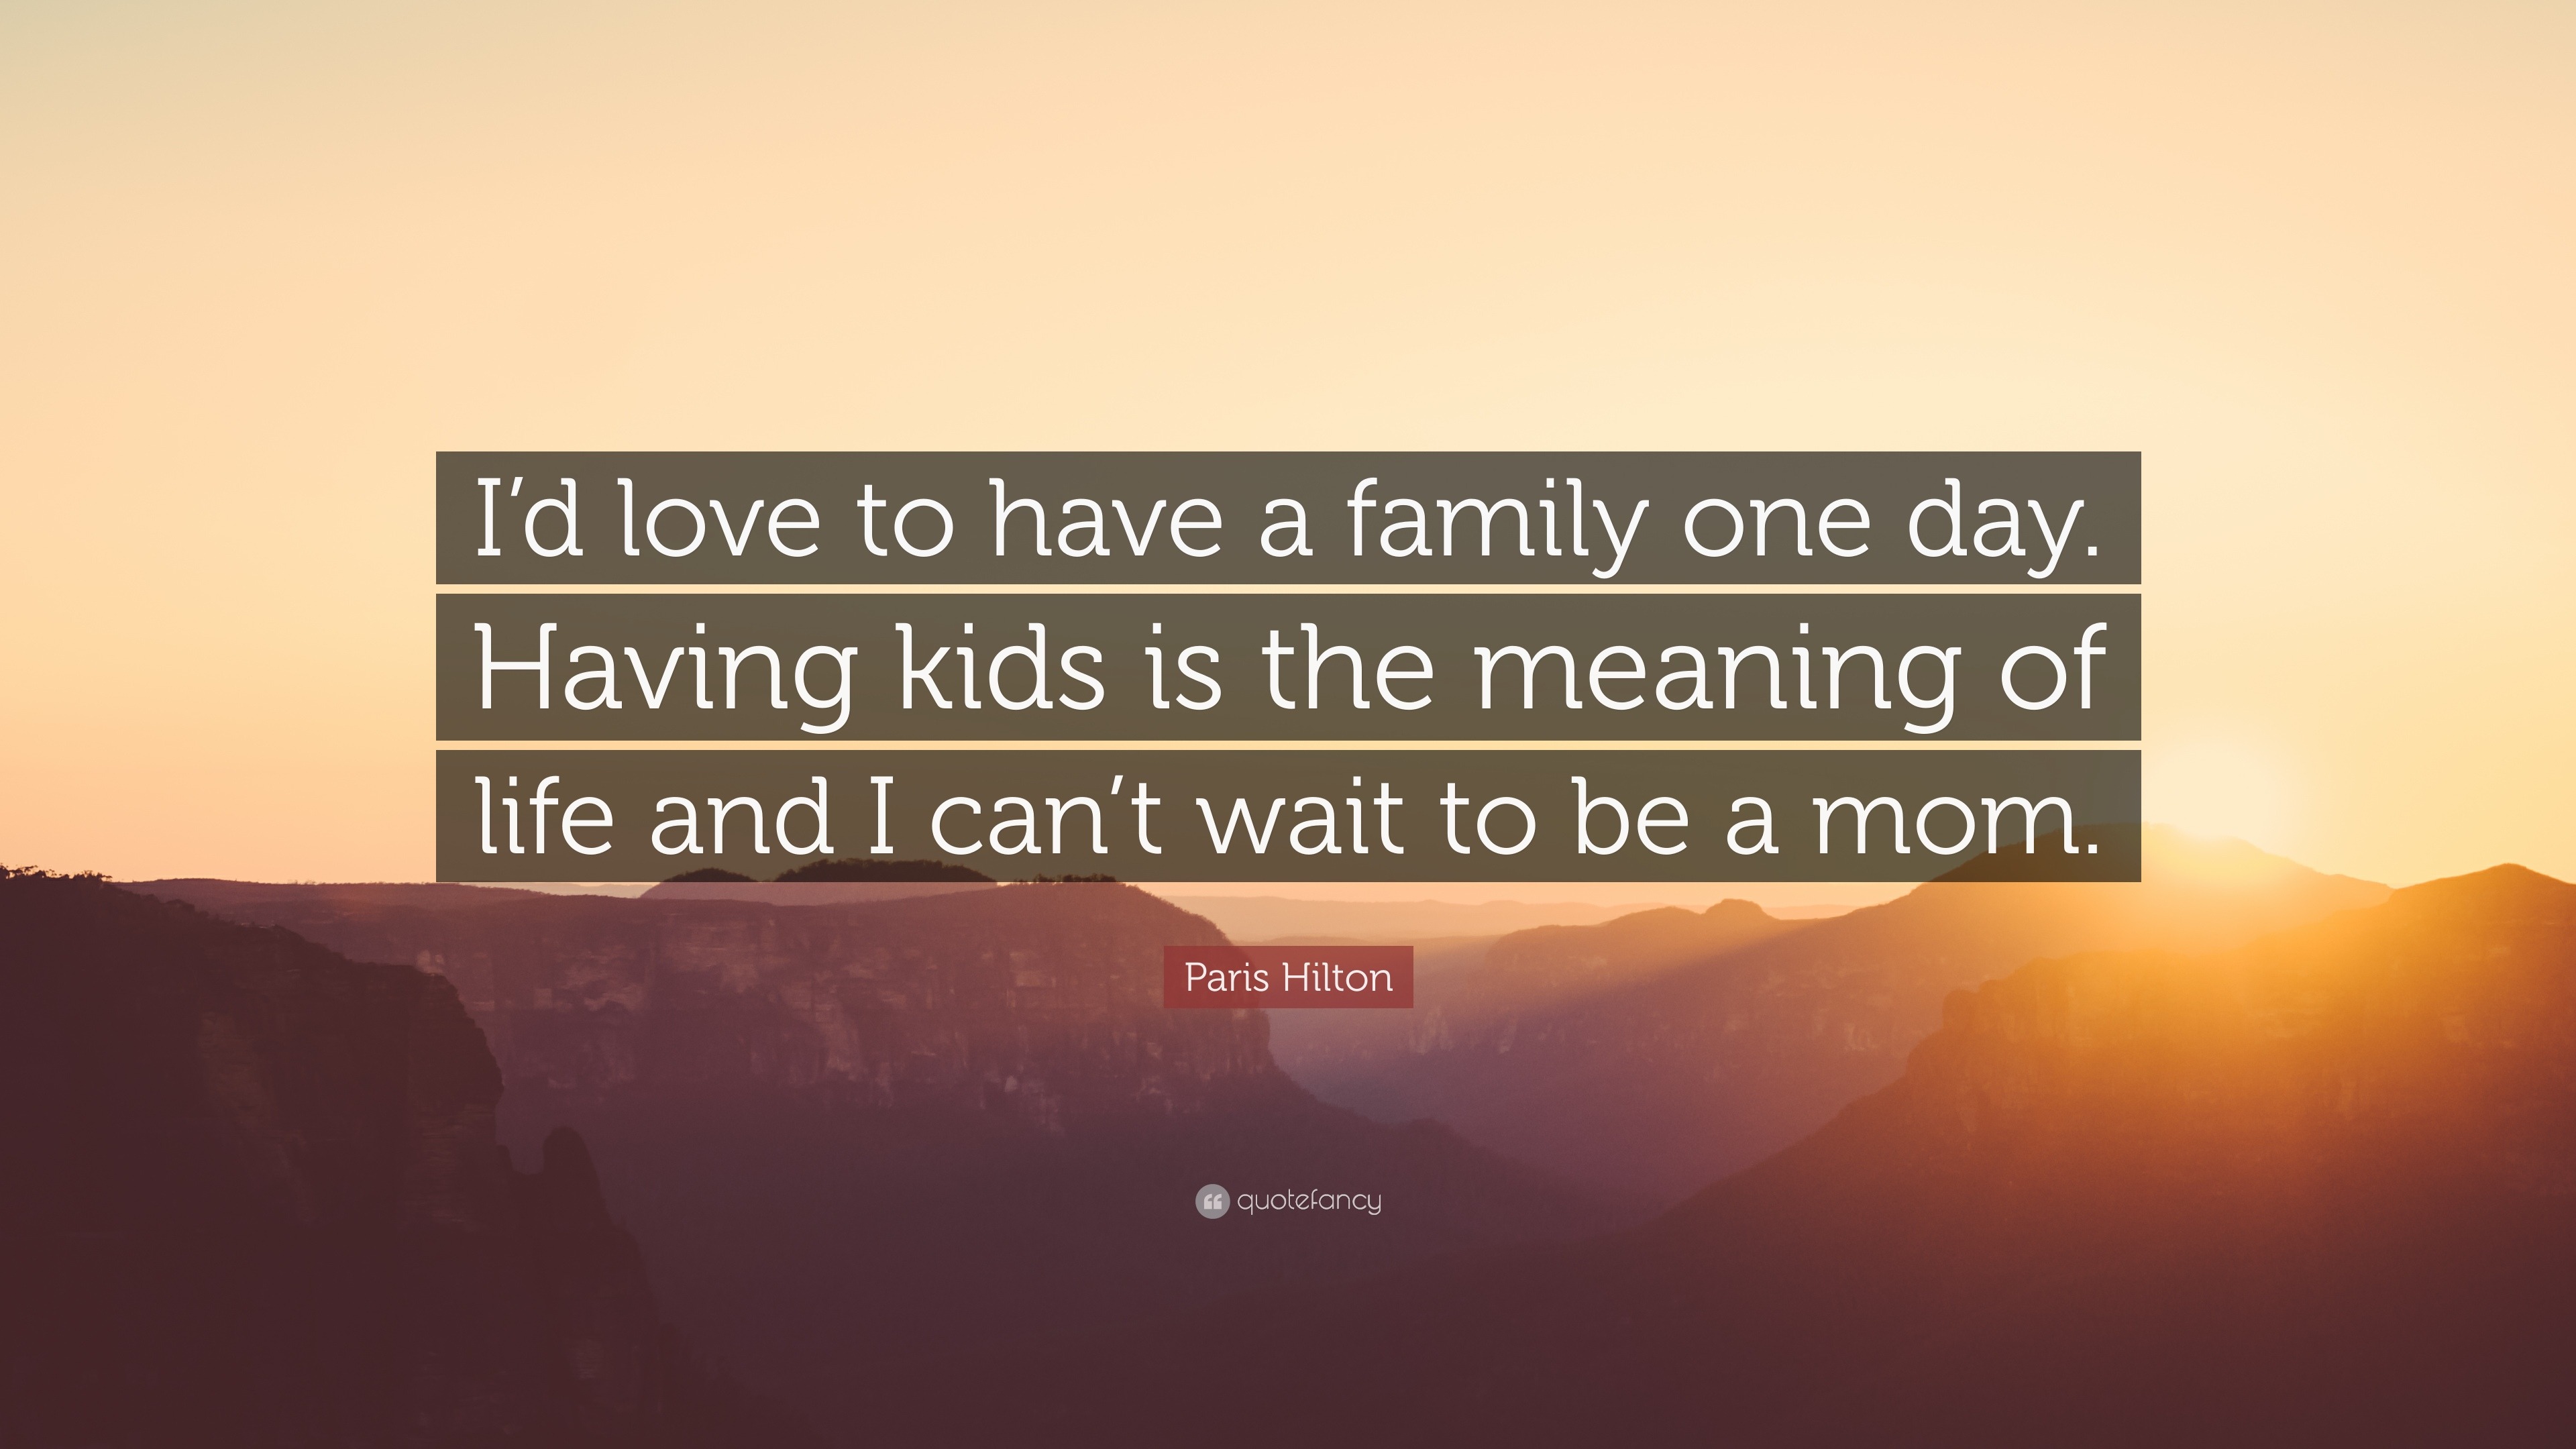 Paris Hilton Quote “I d love to have a family one day